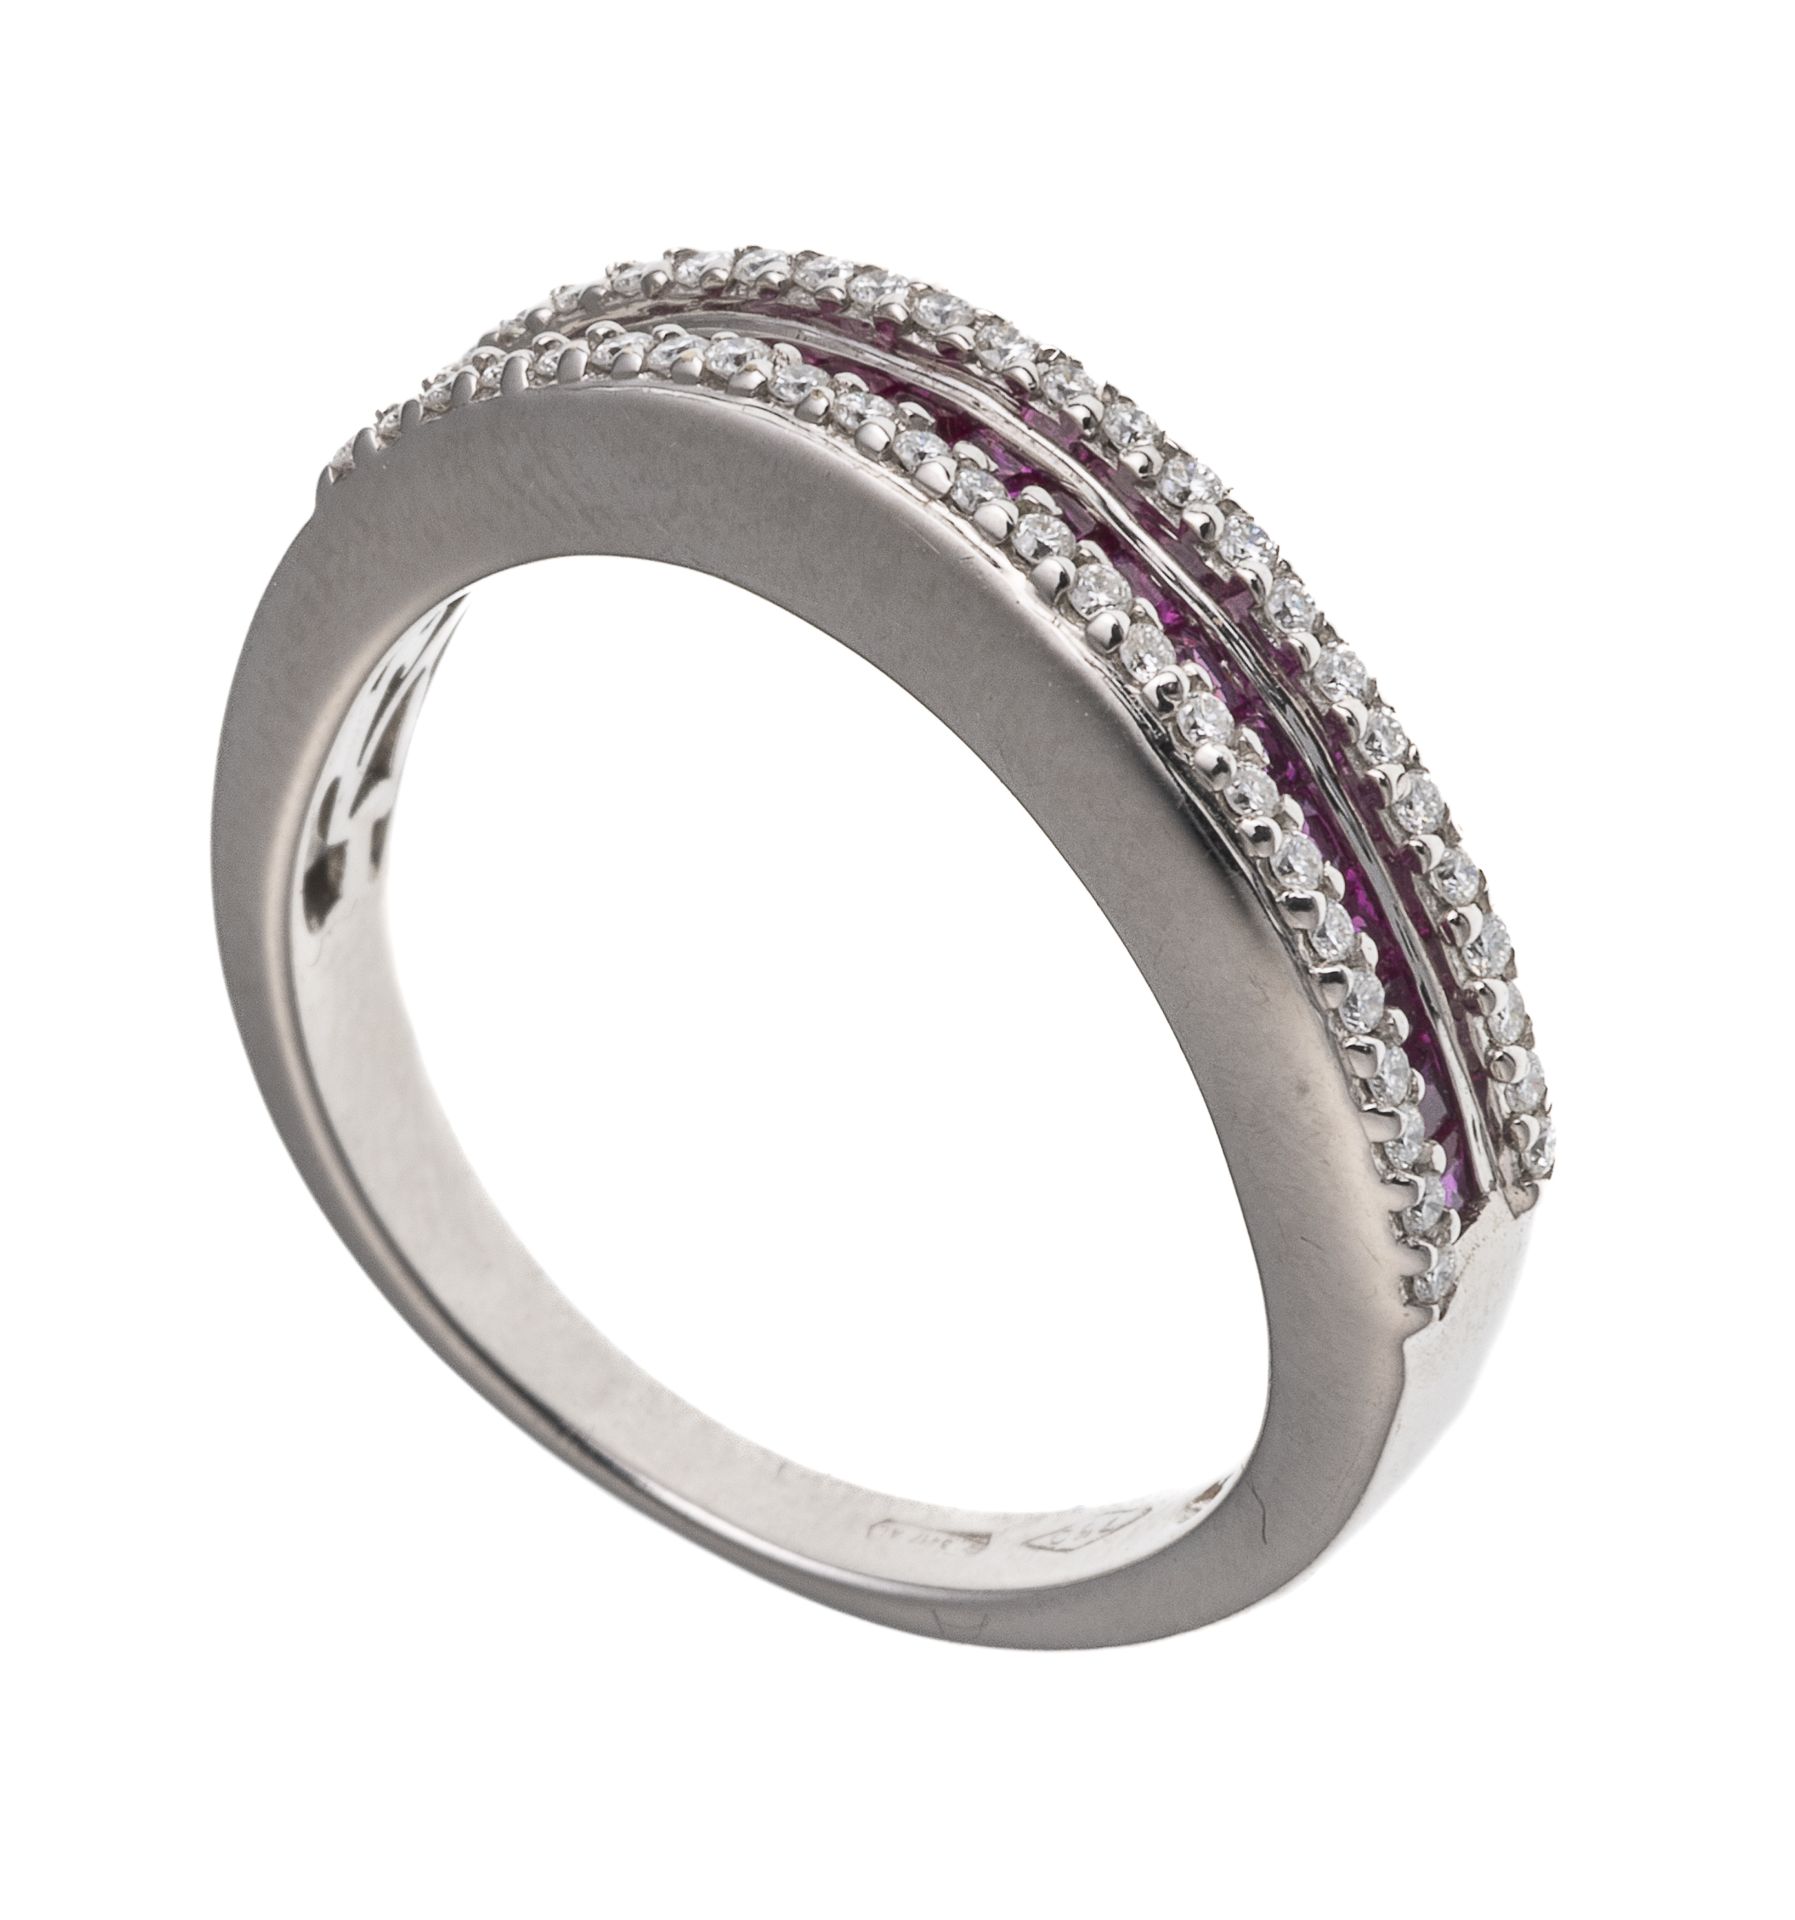 WHITE GOLD RING WITH RUBIES AND DIAMONDS